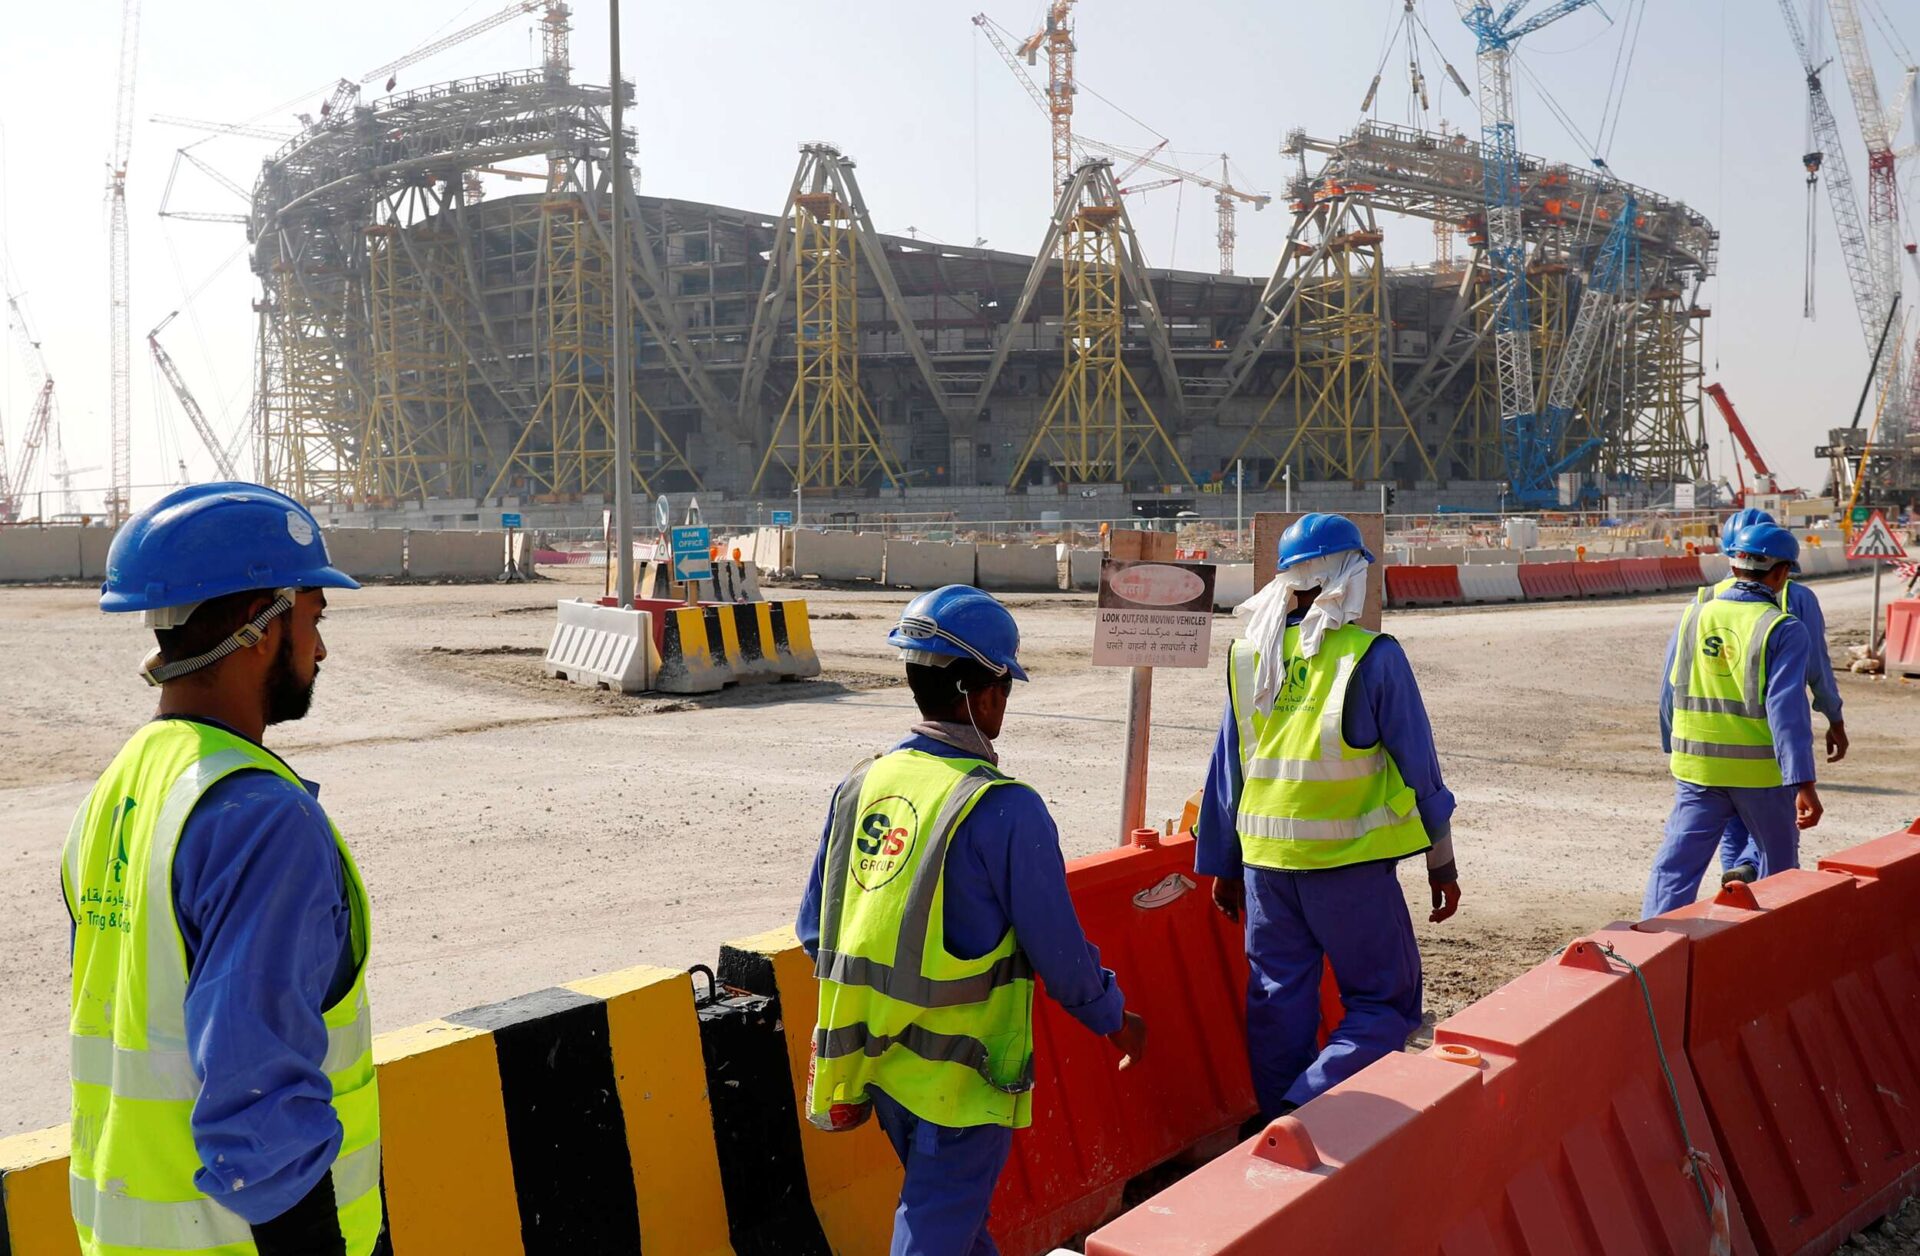 "400-500" migrant workers died while working on World Cup projects in Qatar.